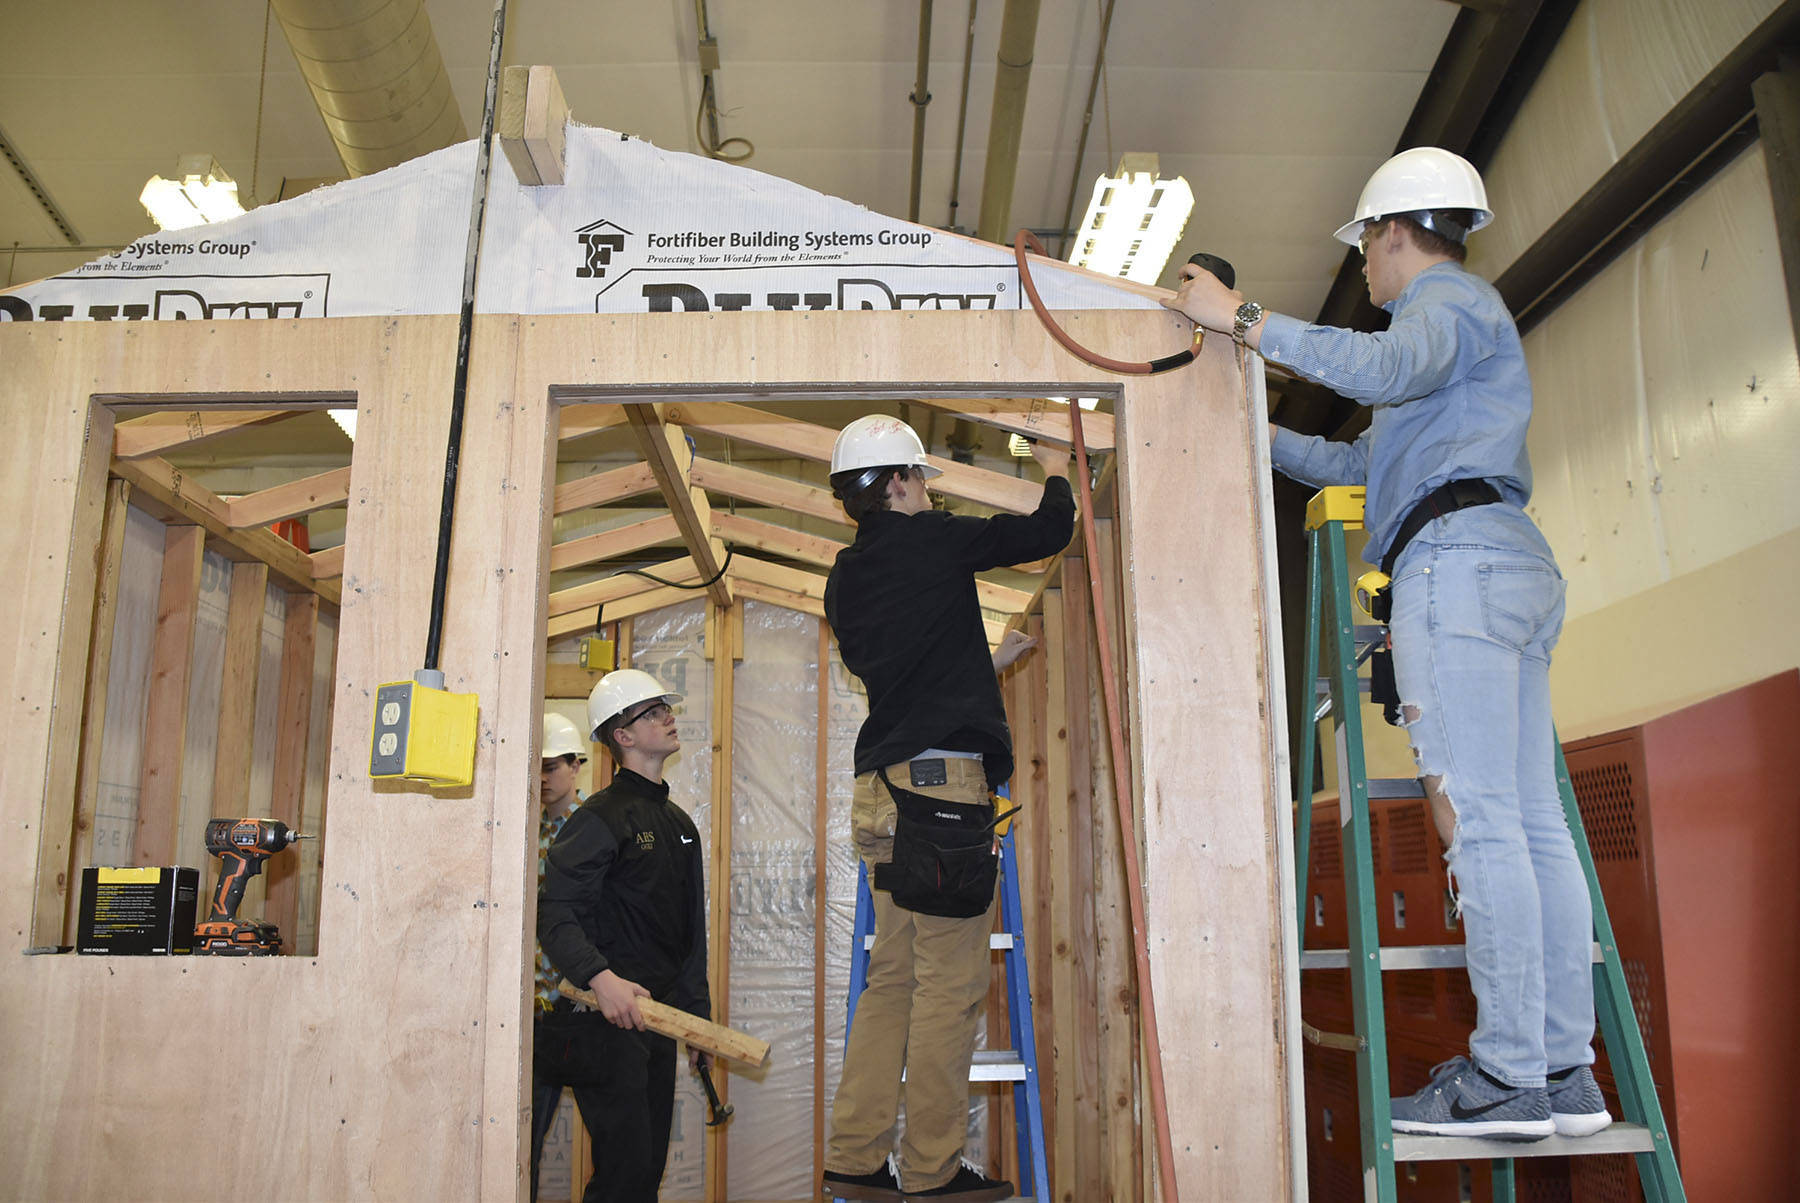 AHS students gain valuable building skills while helping homeless